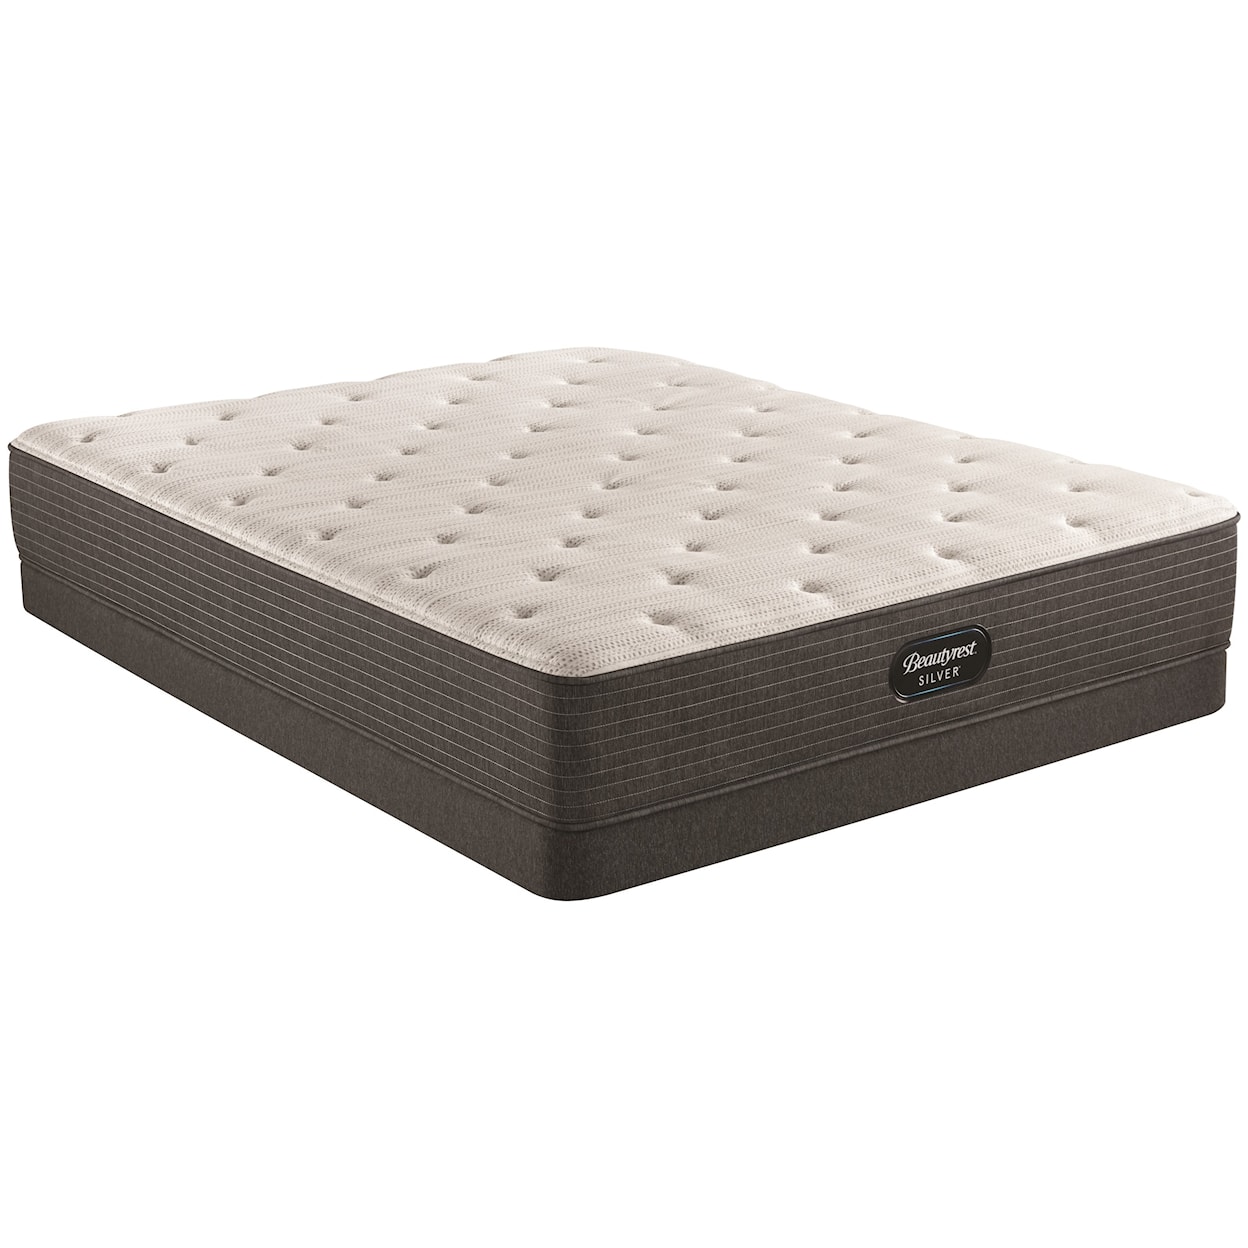 Beautyrest BRS900 Plush Queen 12" Pocketed Coil Low Pro Set